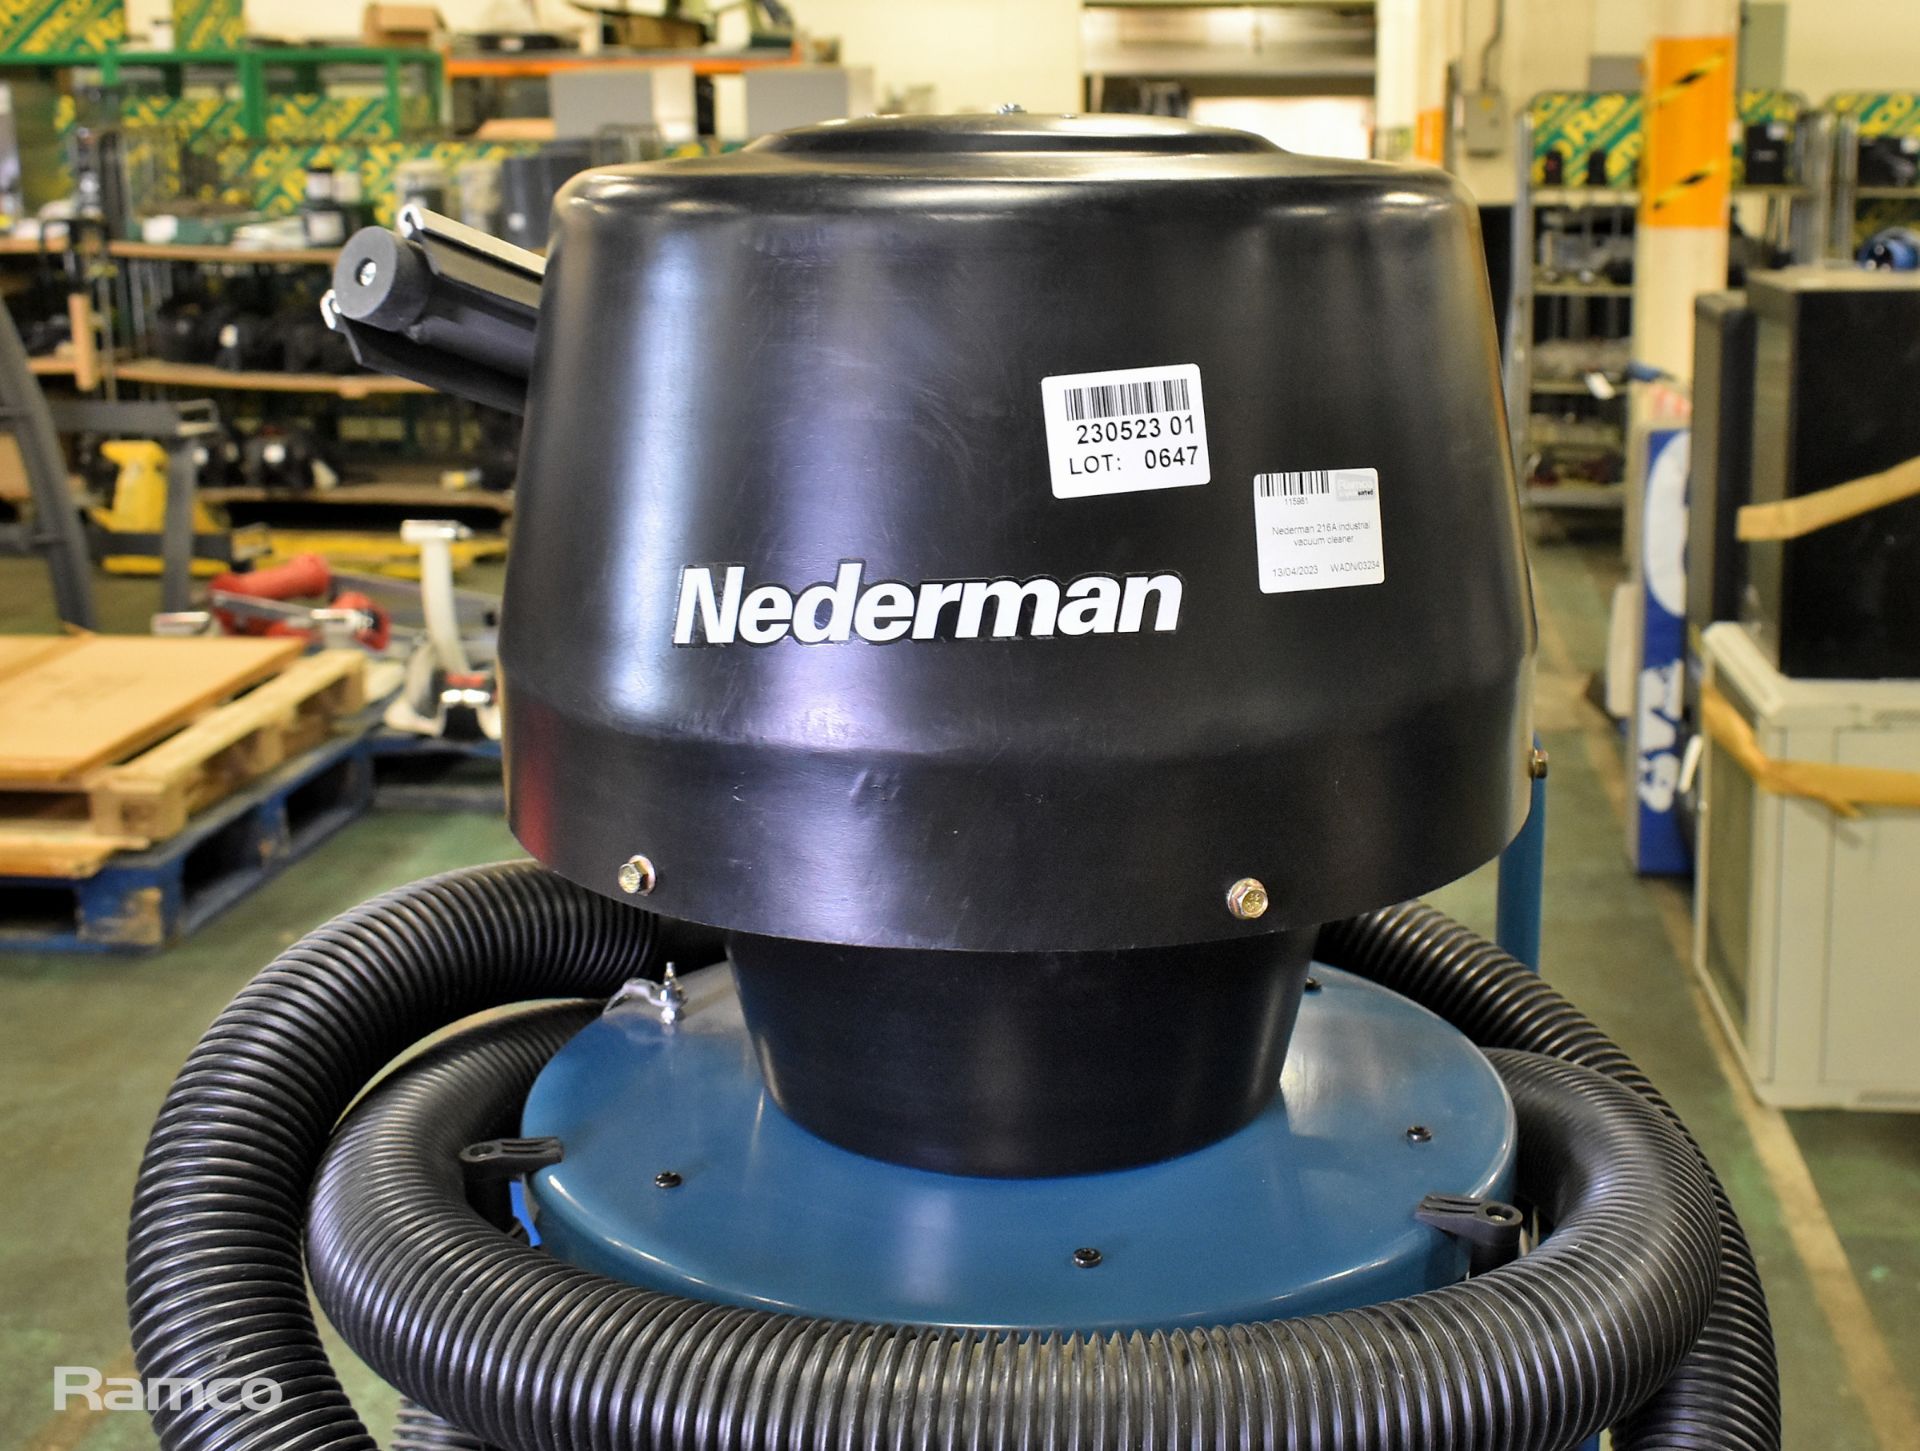 Nederman 216A industrial mobile vacuum cleaner - 8 bar - Image 2 of 6